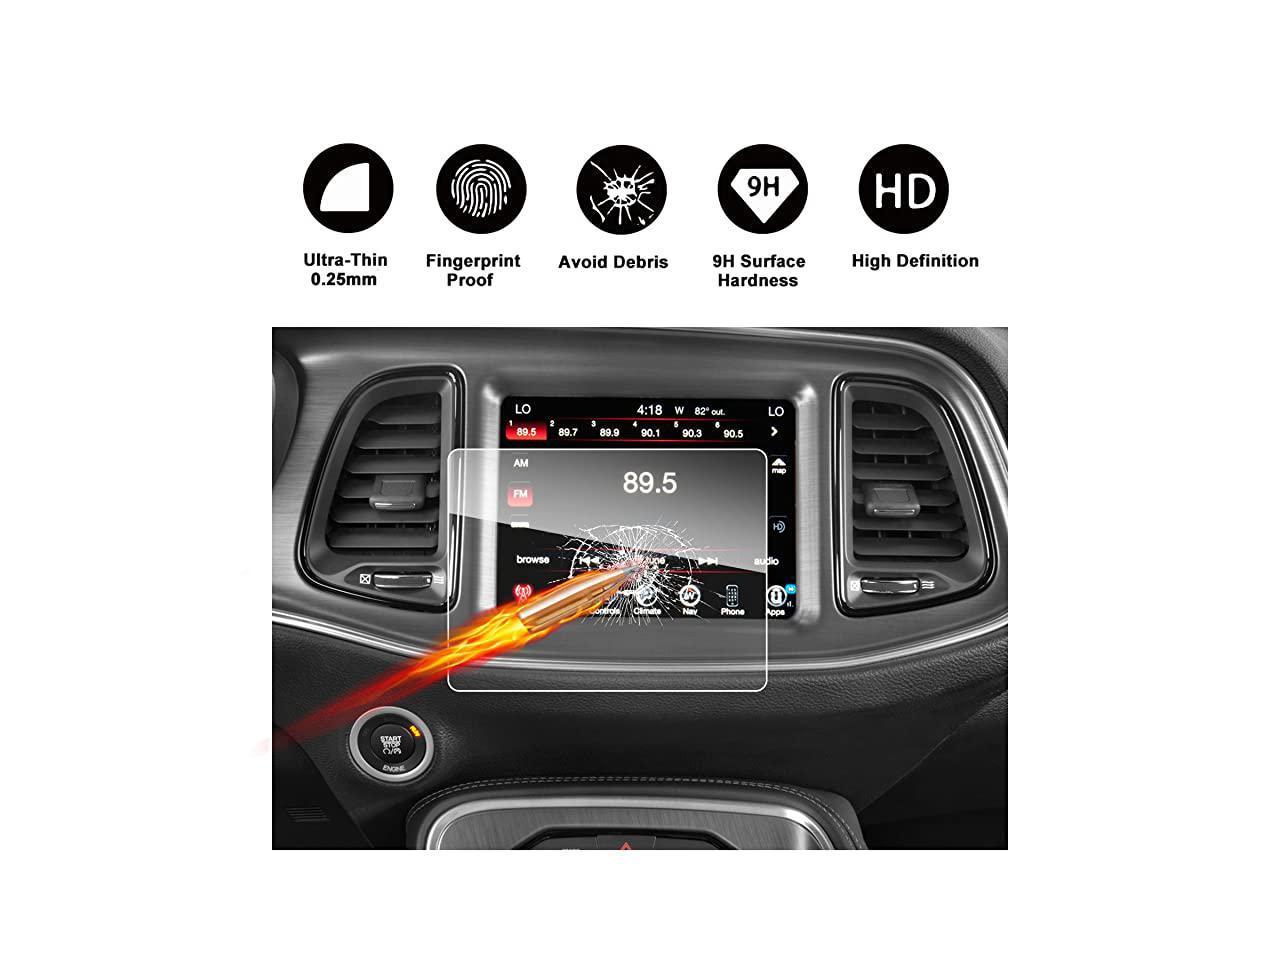 2010-2018 Dodge Journey Uconnect 8.4-Inch Touch Screen Car Display Navigation Screen Protector RUIYA HD Clear TEMPERED GLASS Car In-Dash Screen Protective Film 